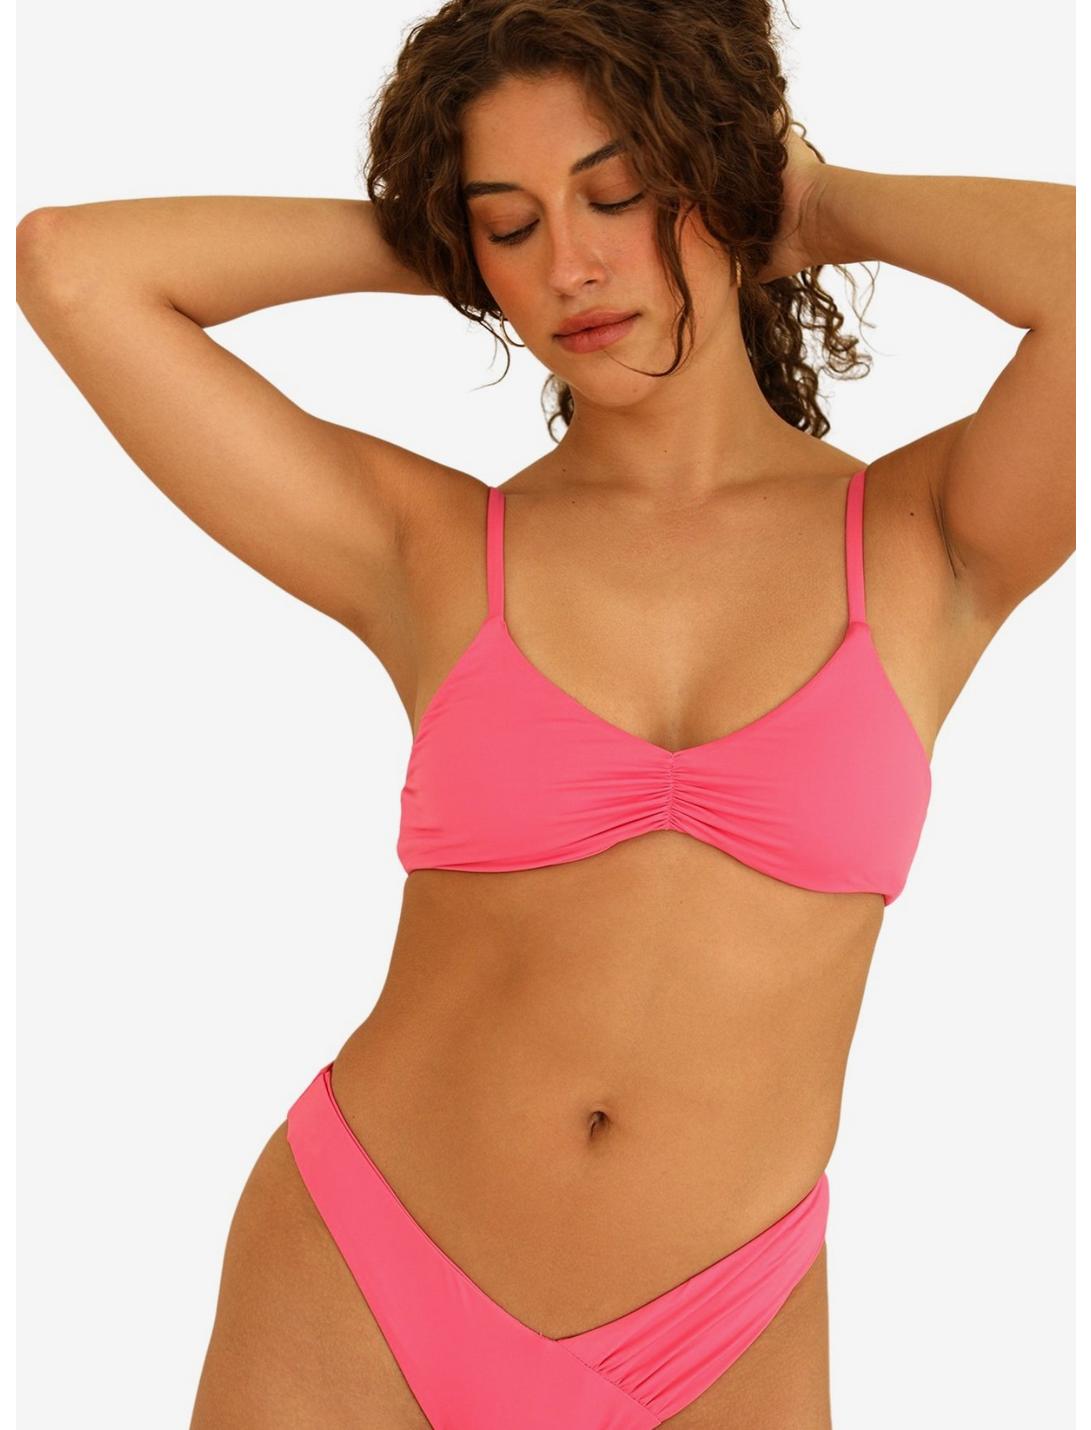 Dippin' Daisy's Britney Swim Top Plastic Pink, PINK, hi-res